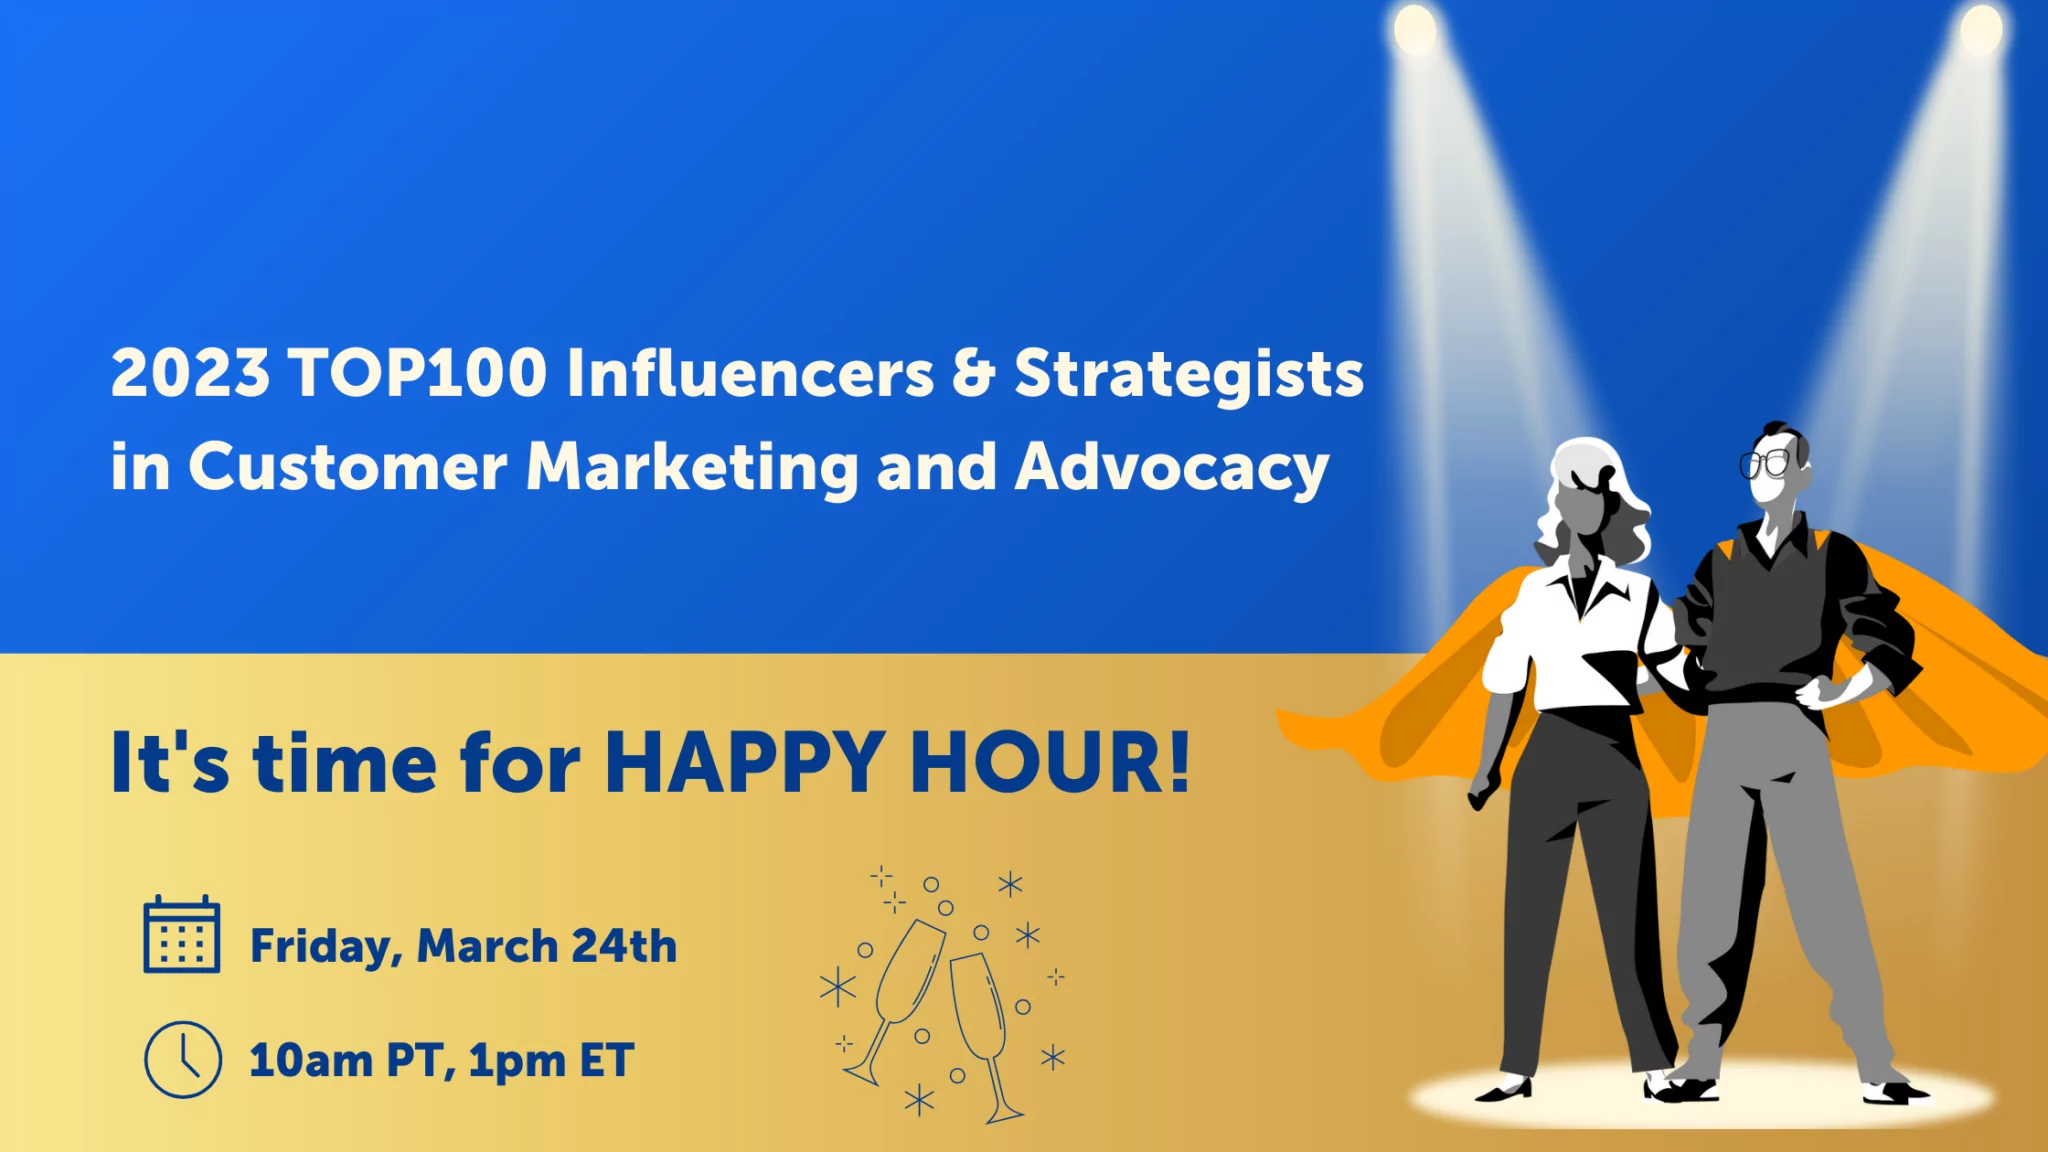 2023 TOP100 Influencers & Strategists in CMA Happy Hour